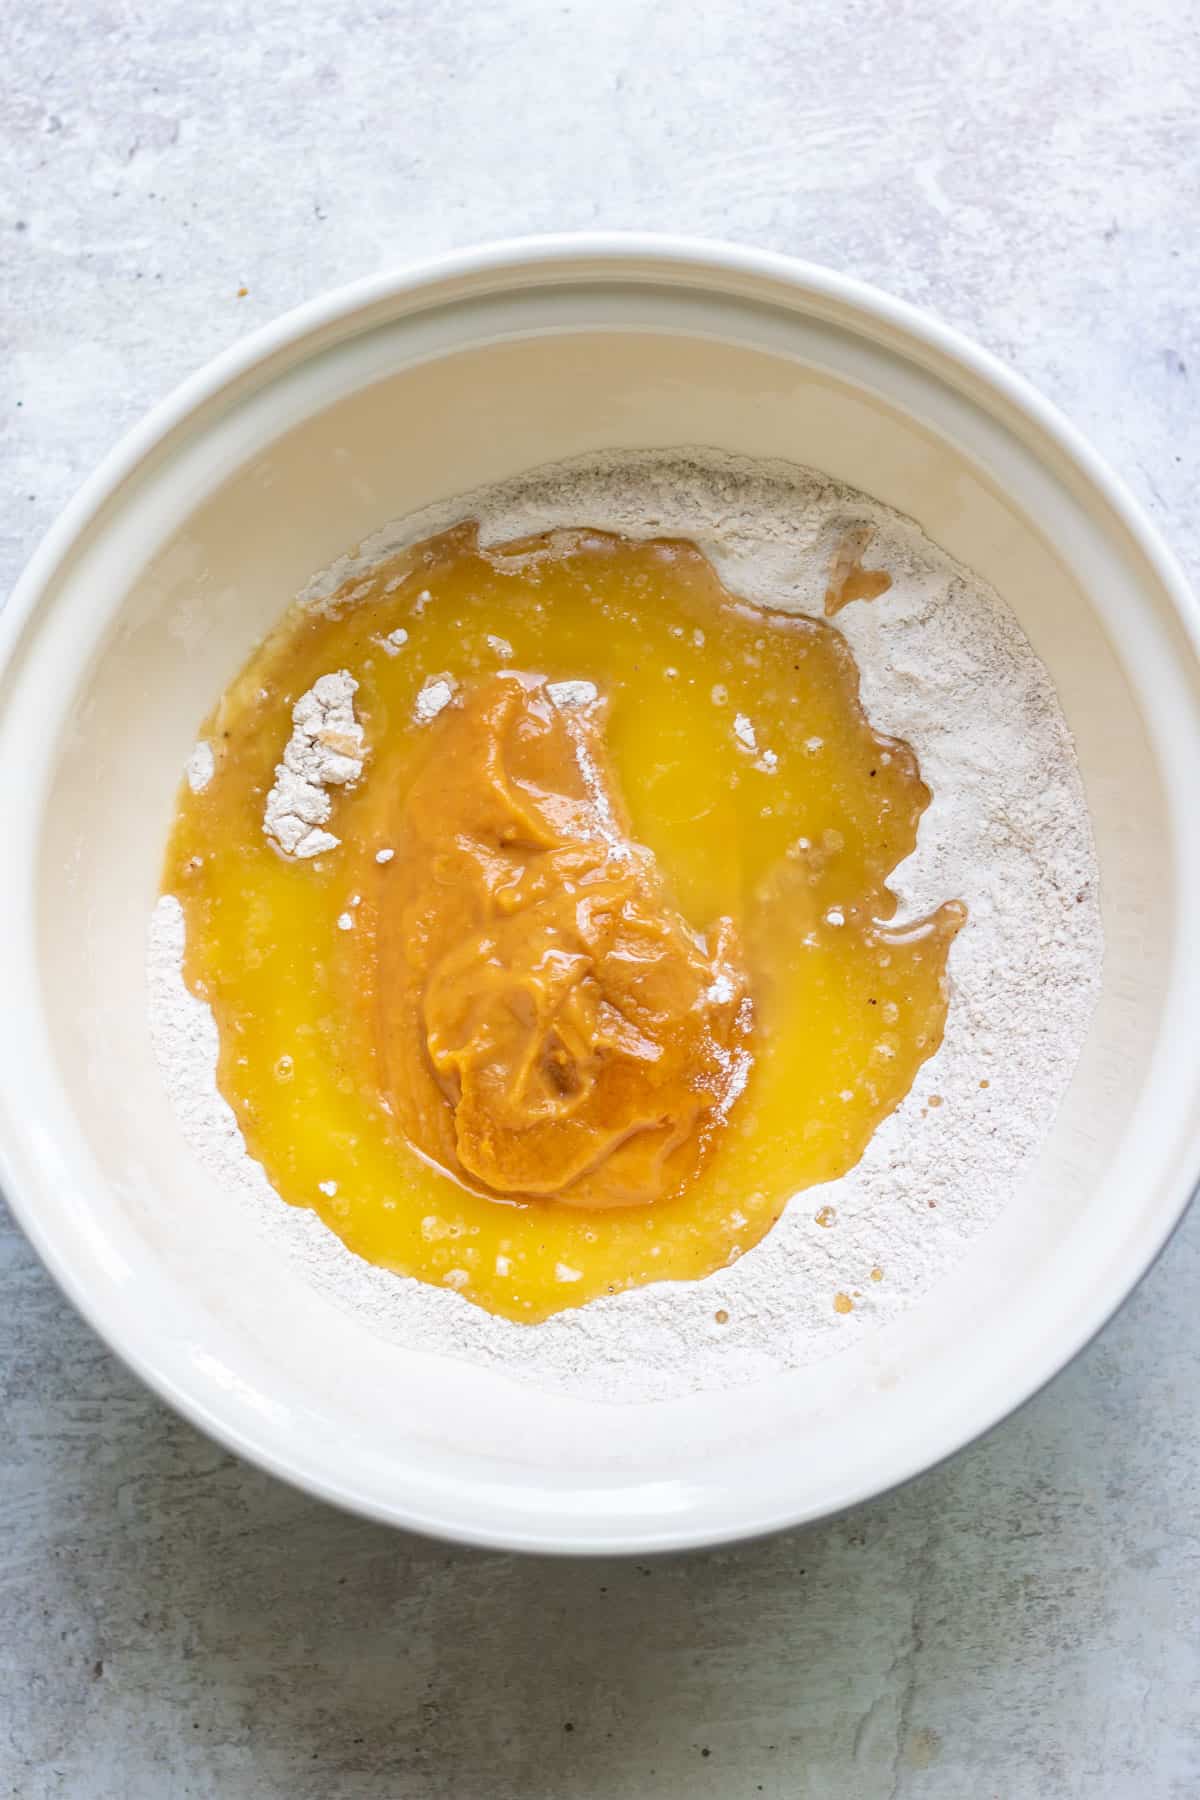 Pumpkin and wet ingredients added to the bowl.